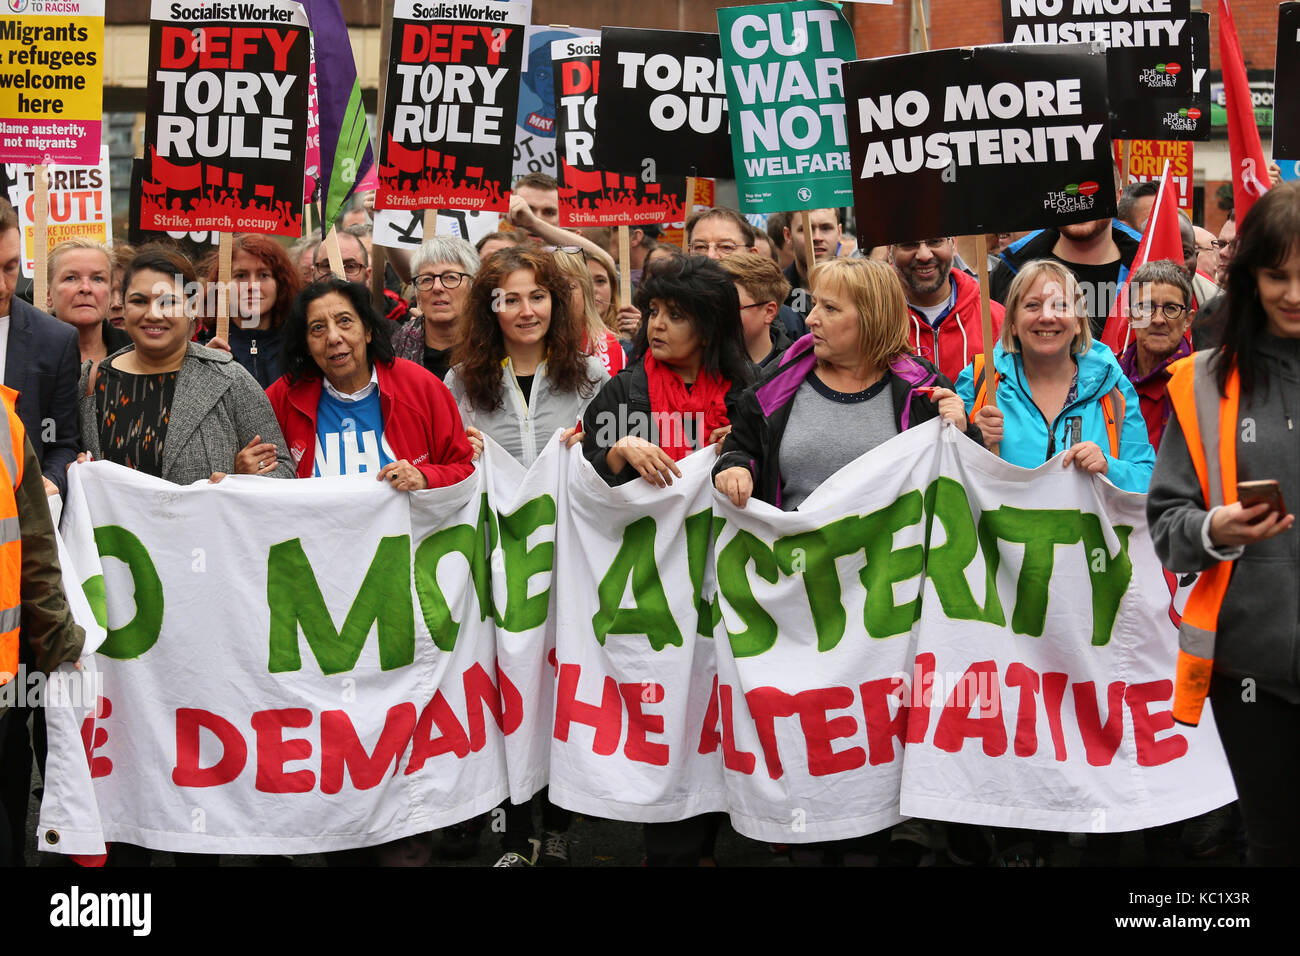 Manchester, UK. 1st October, 2017. No more austerity and anti Tory protesters march through the city during the Conservative party Conference in Manchester,1st October, 2017 (C)Barbara Cook/Alamy Live News Credit: Barbara Cook/Alamy Live News Stock Photo